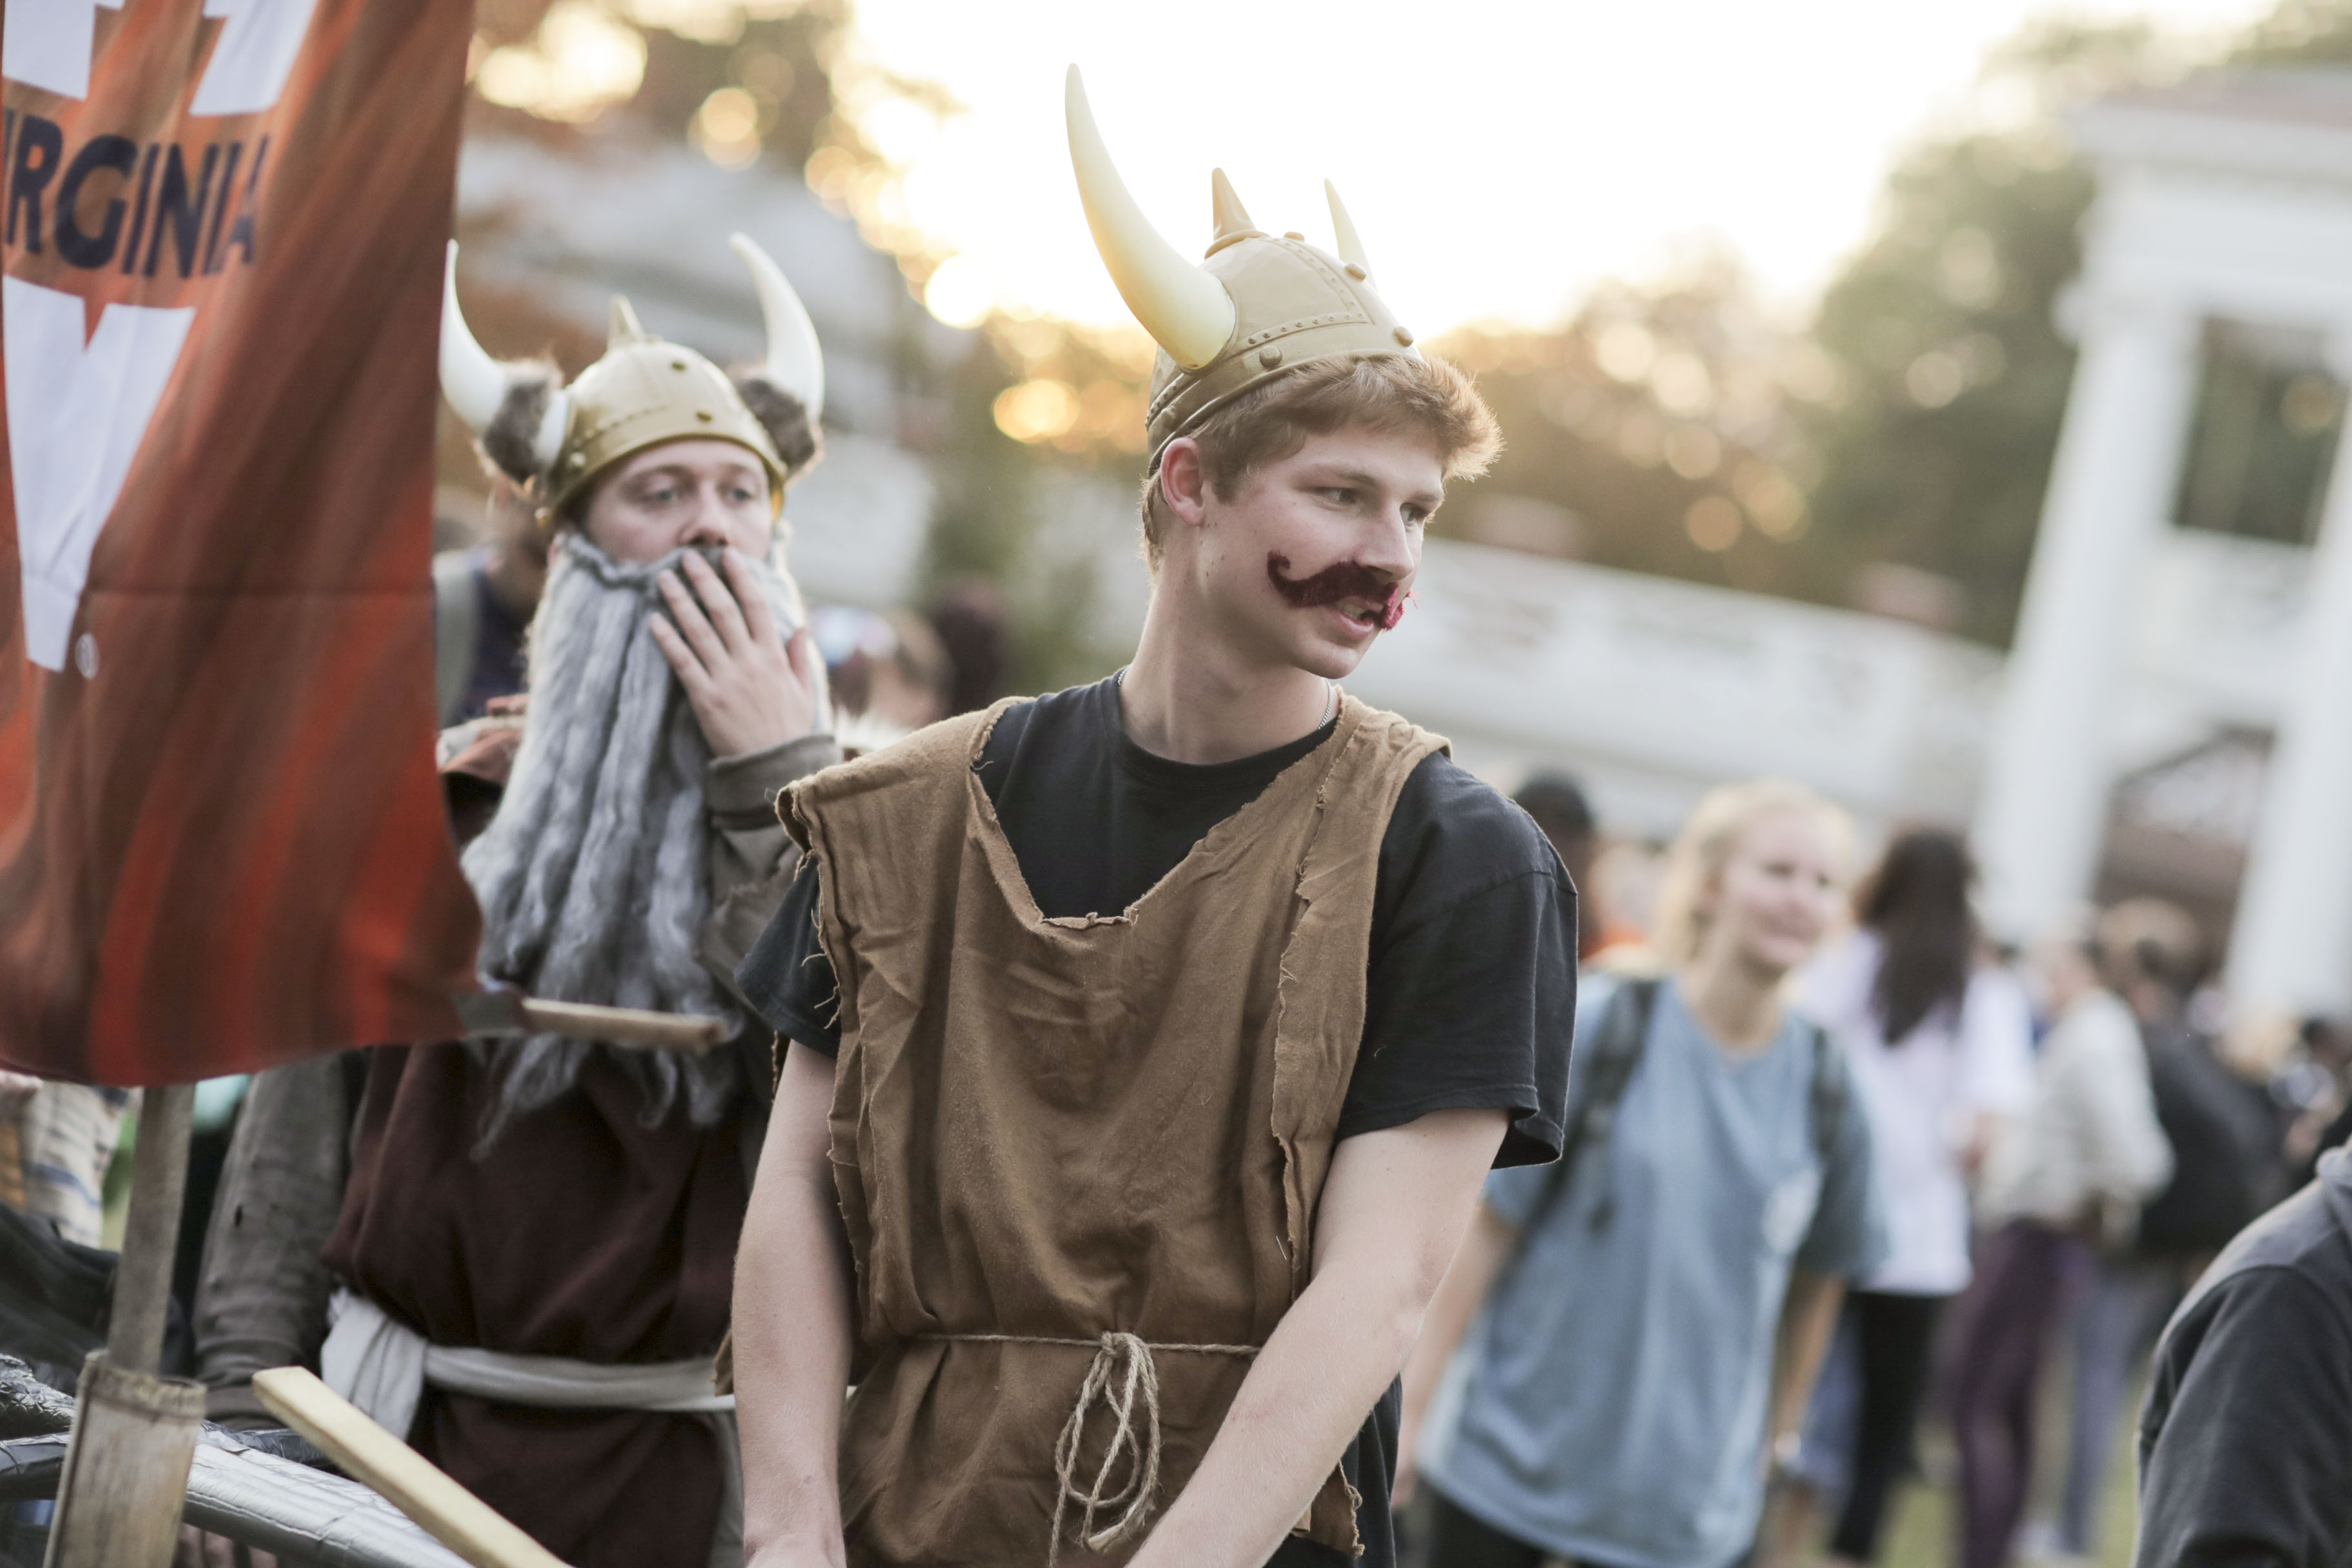 Students dressed up as vikings on the Lawn